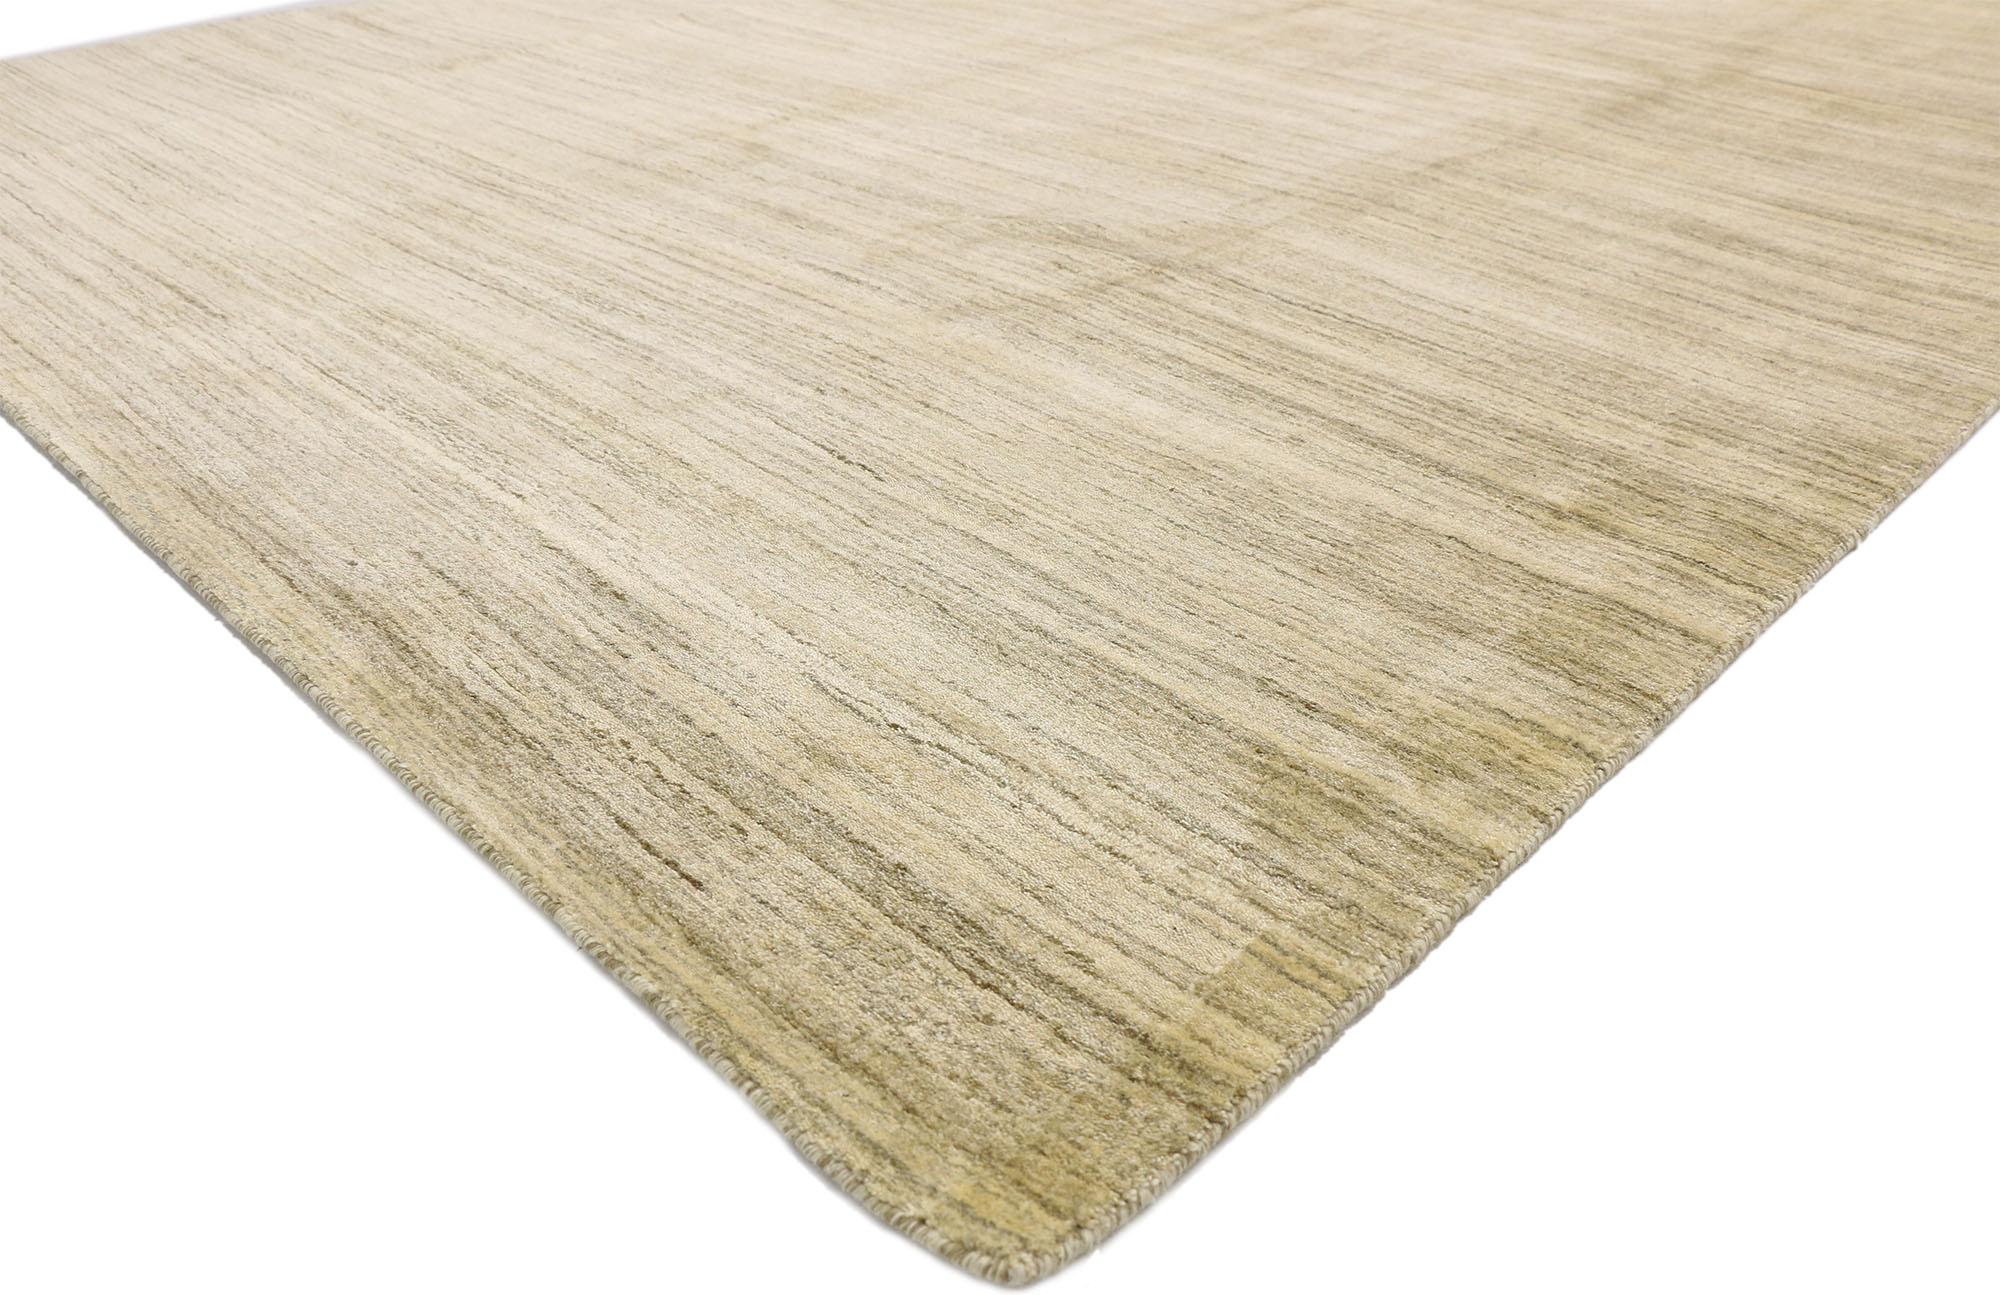 30457 new transitional area rug with cozy, hygge vibes and warm Amish-Shaker style. This neutral transitional area rug emanates function and versatility with warm, hygge vibes. It features striations of subtle colors running across the width in